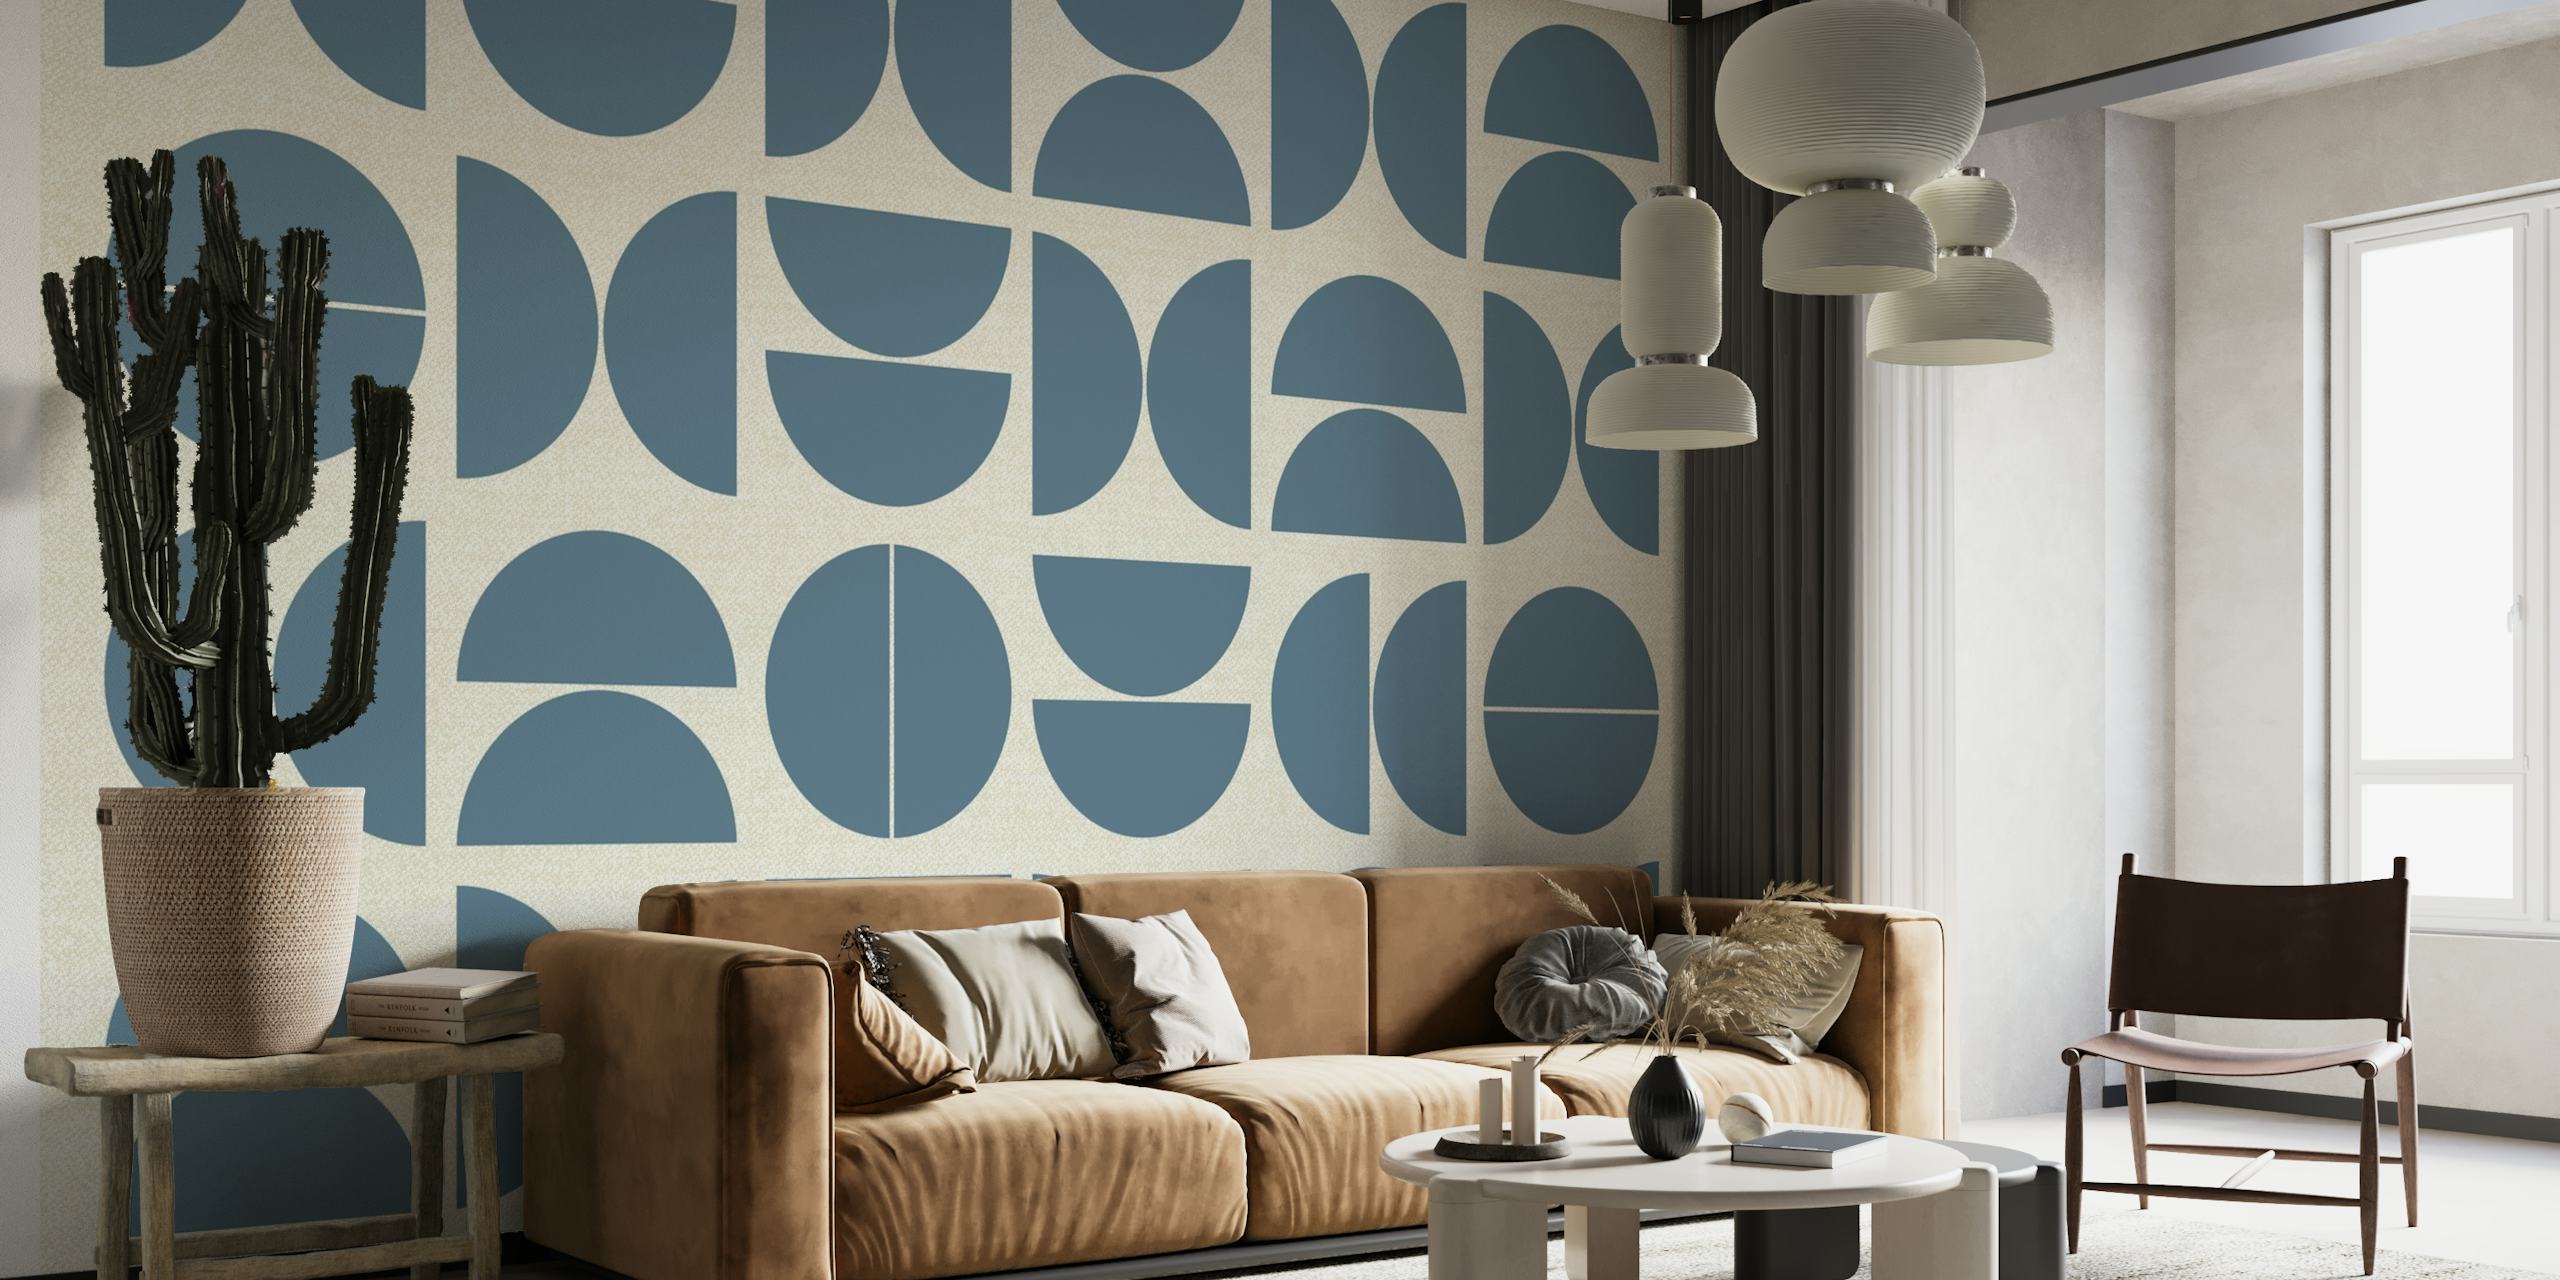 Abstract Bauhaus-style wall mural with geometric circular patterns in shades of blue